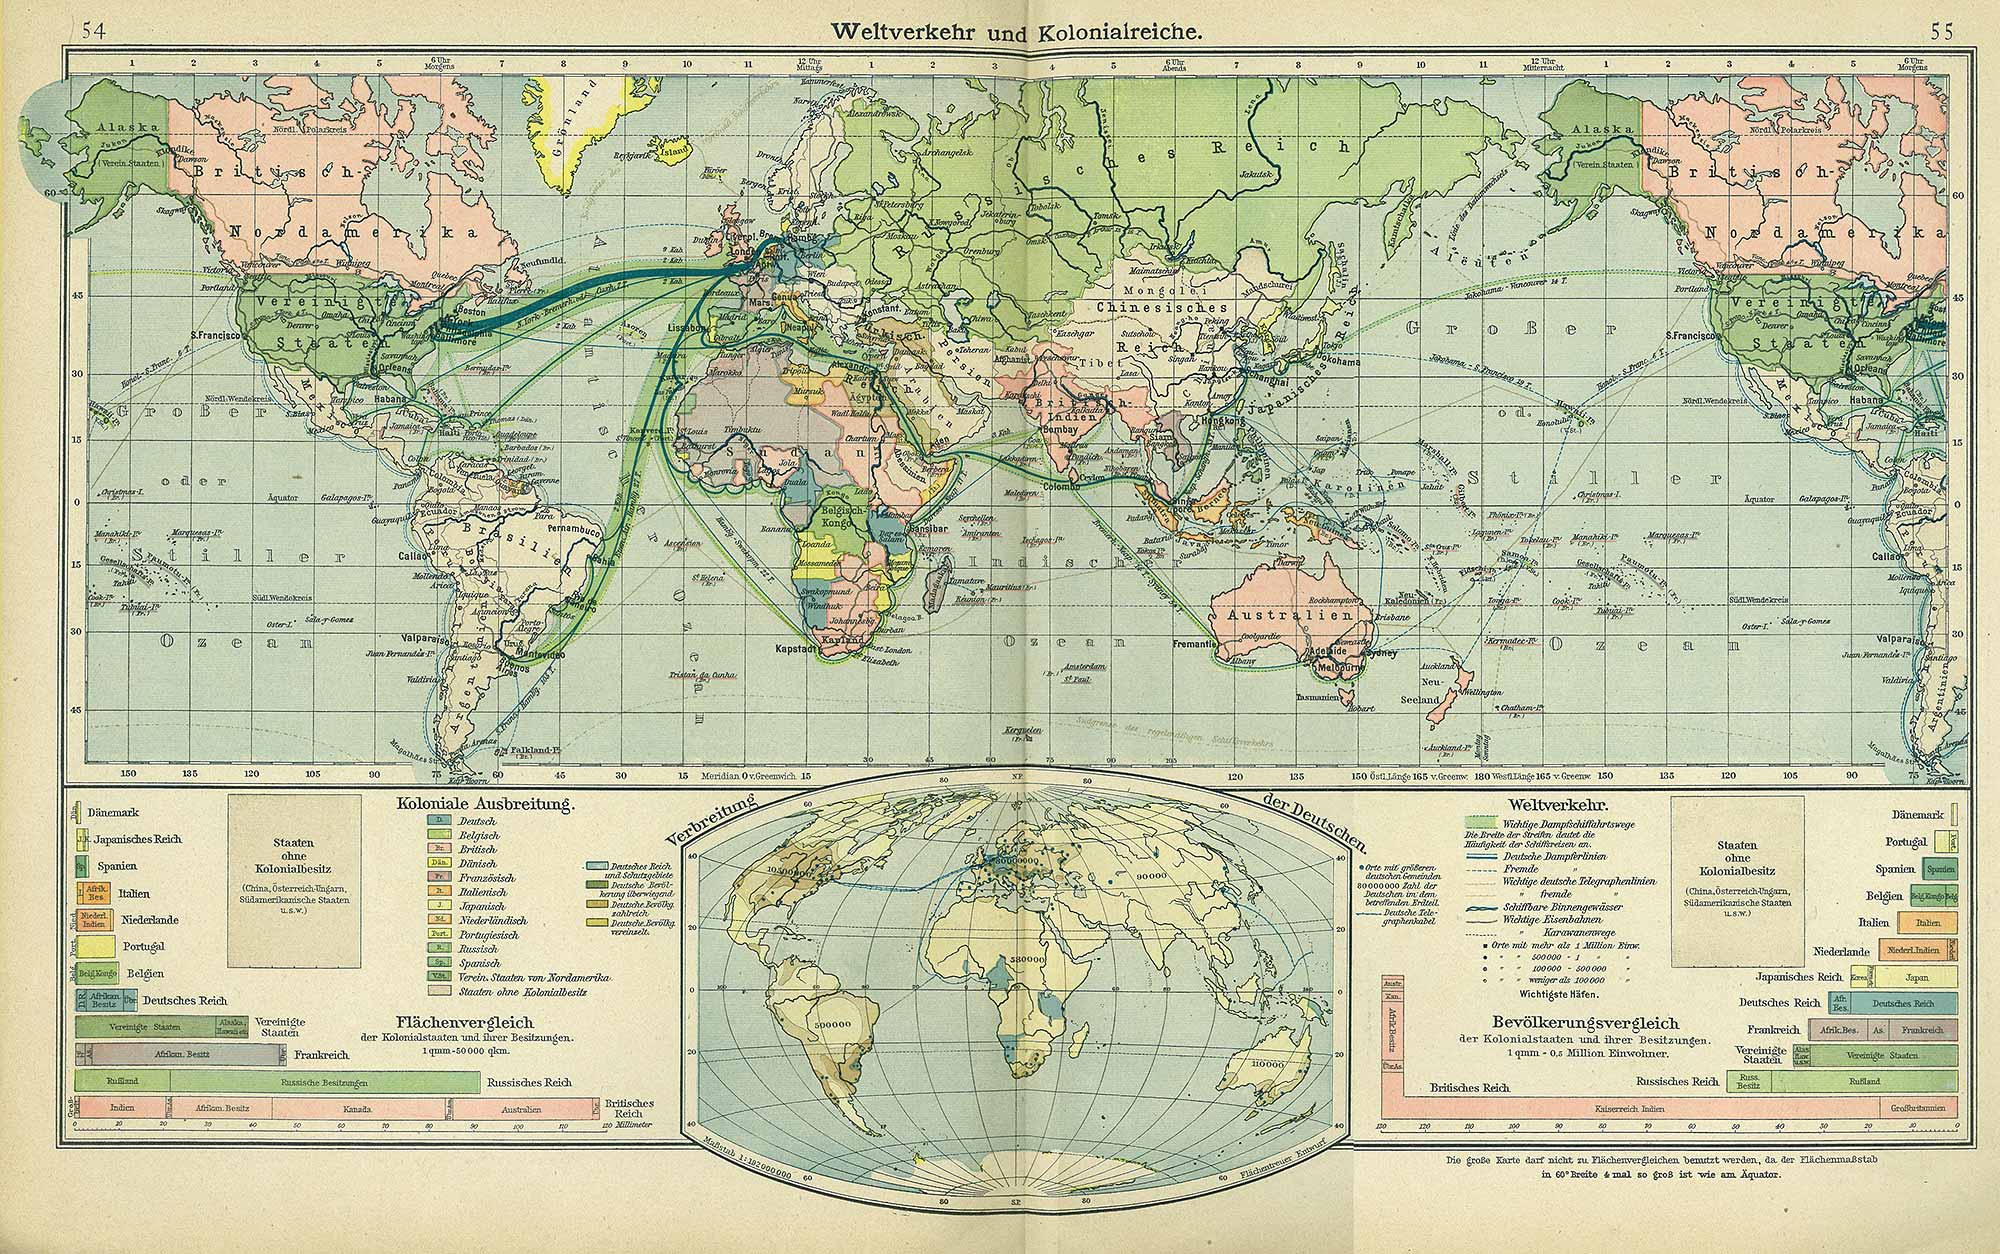 World communications and colonial governments map, Andrees 'Berliner Schul-Atlas', 1916, pages 54 to 55, published size to print border 44.34 cm wide by 27 cm high.